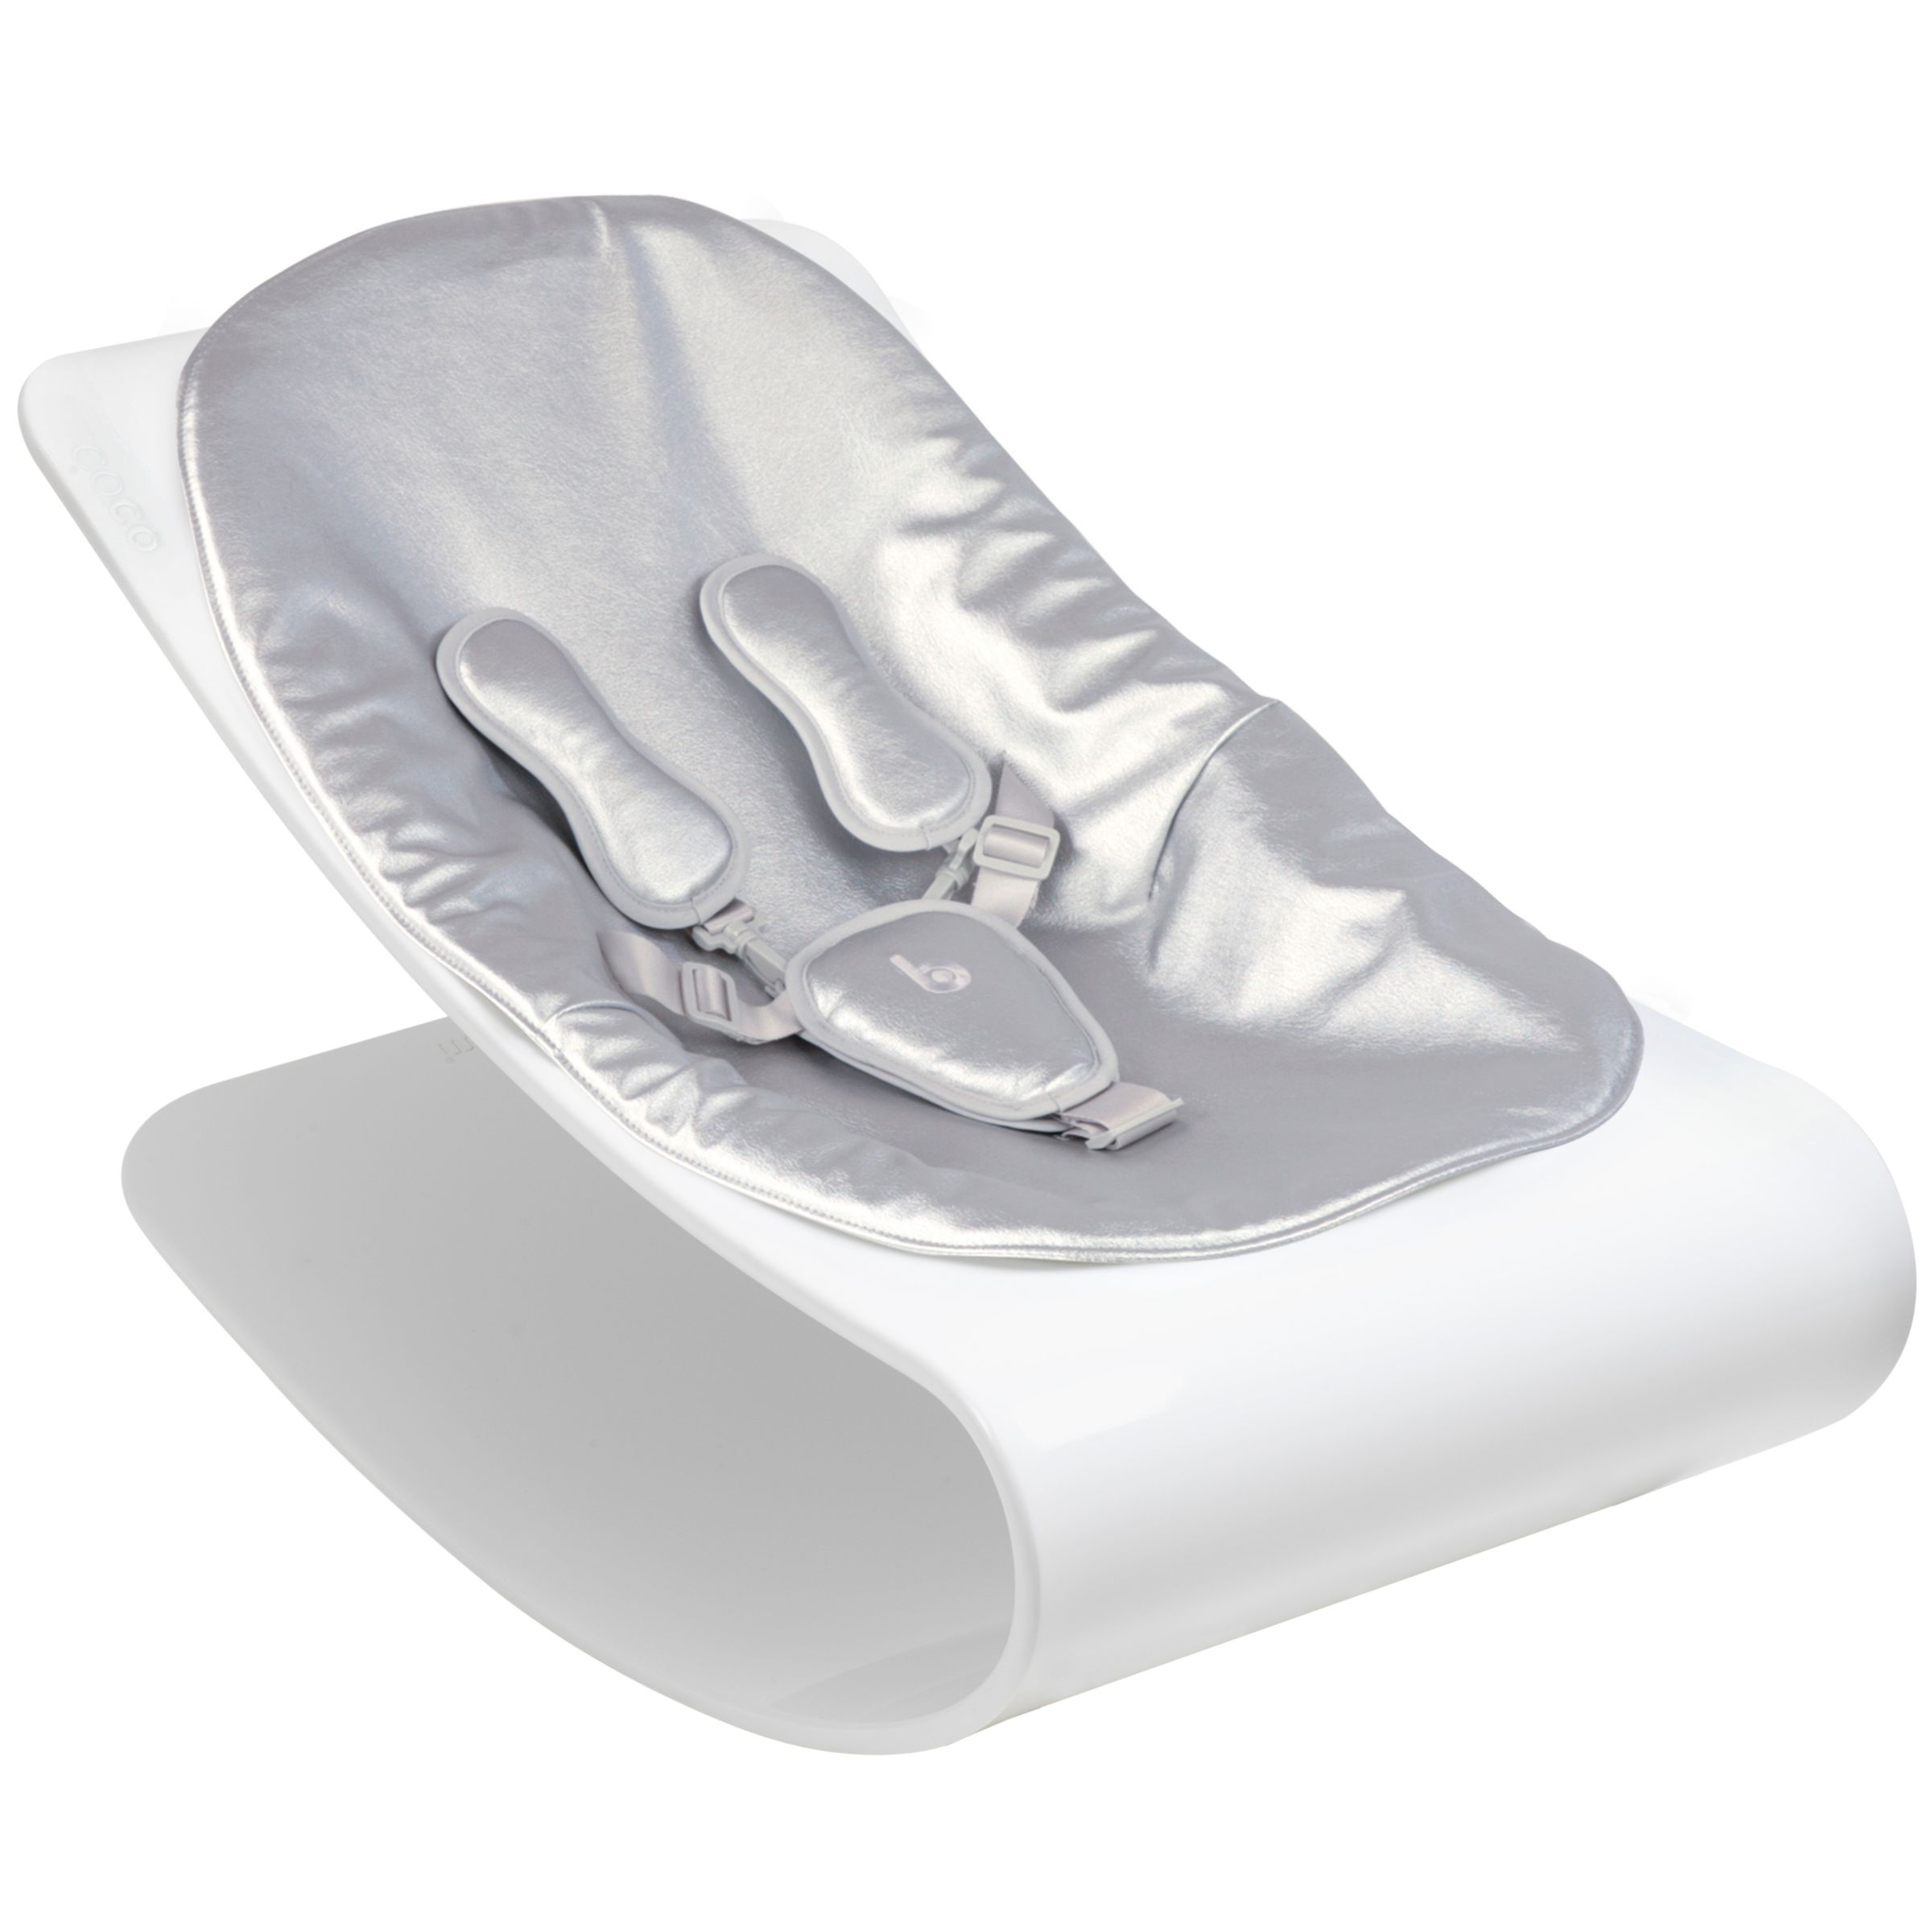 bloom Coco Plexistyle Baby Lounger, Ivory White with Lunar Silver at John Lewis